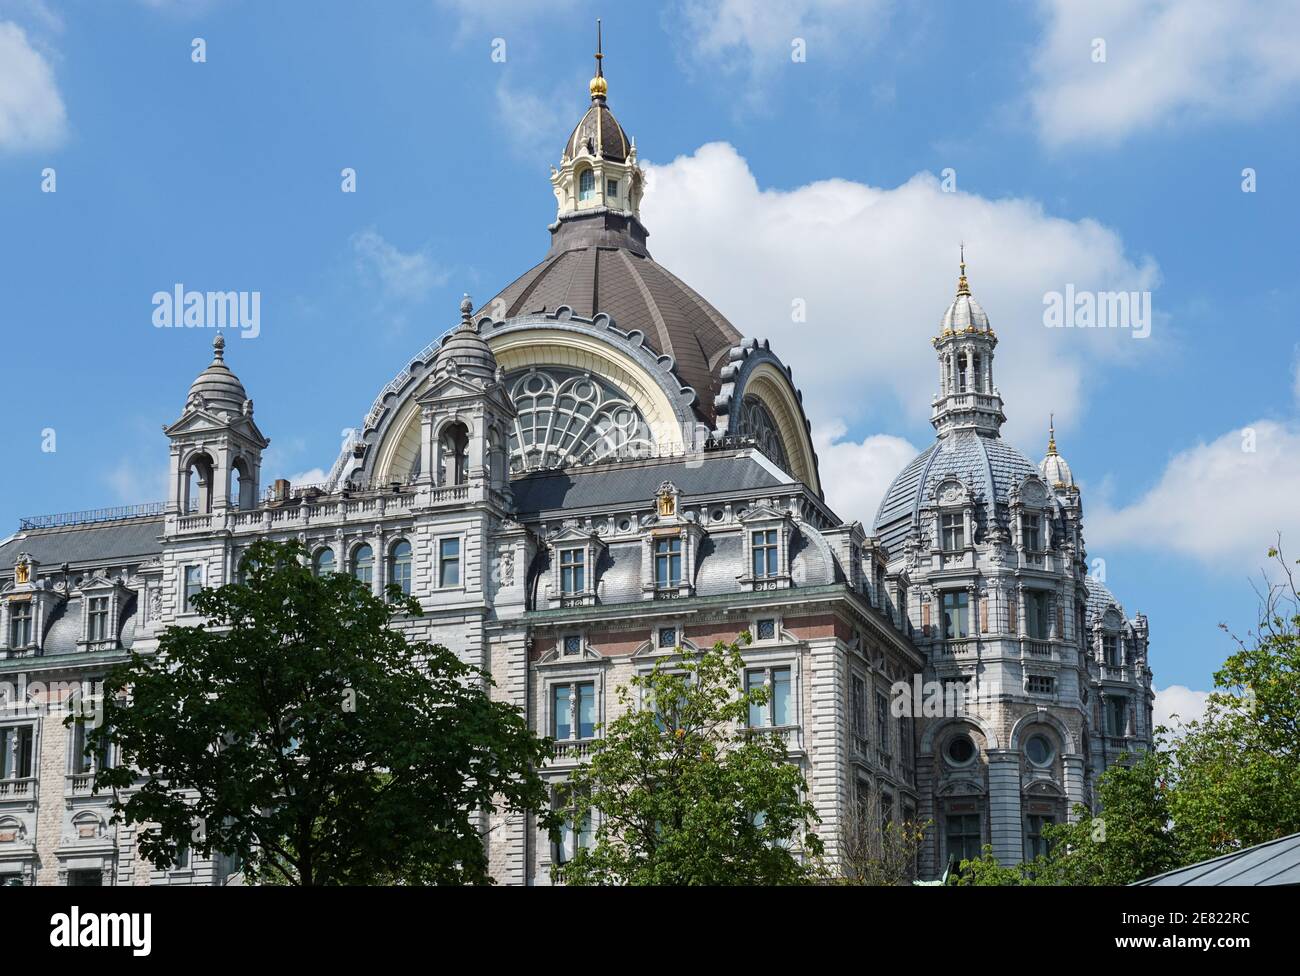 Building exterior of the Antwerp Central Station, Belgium Stock Photo